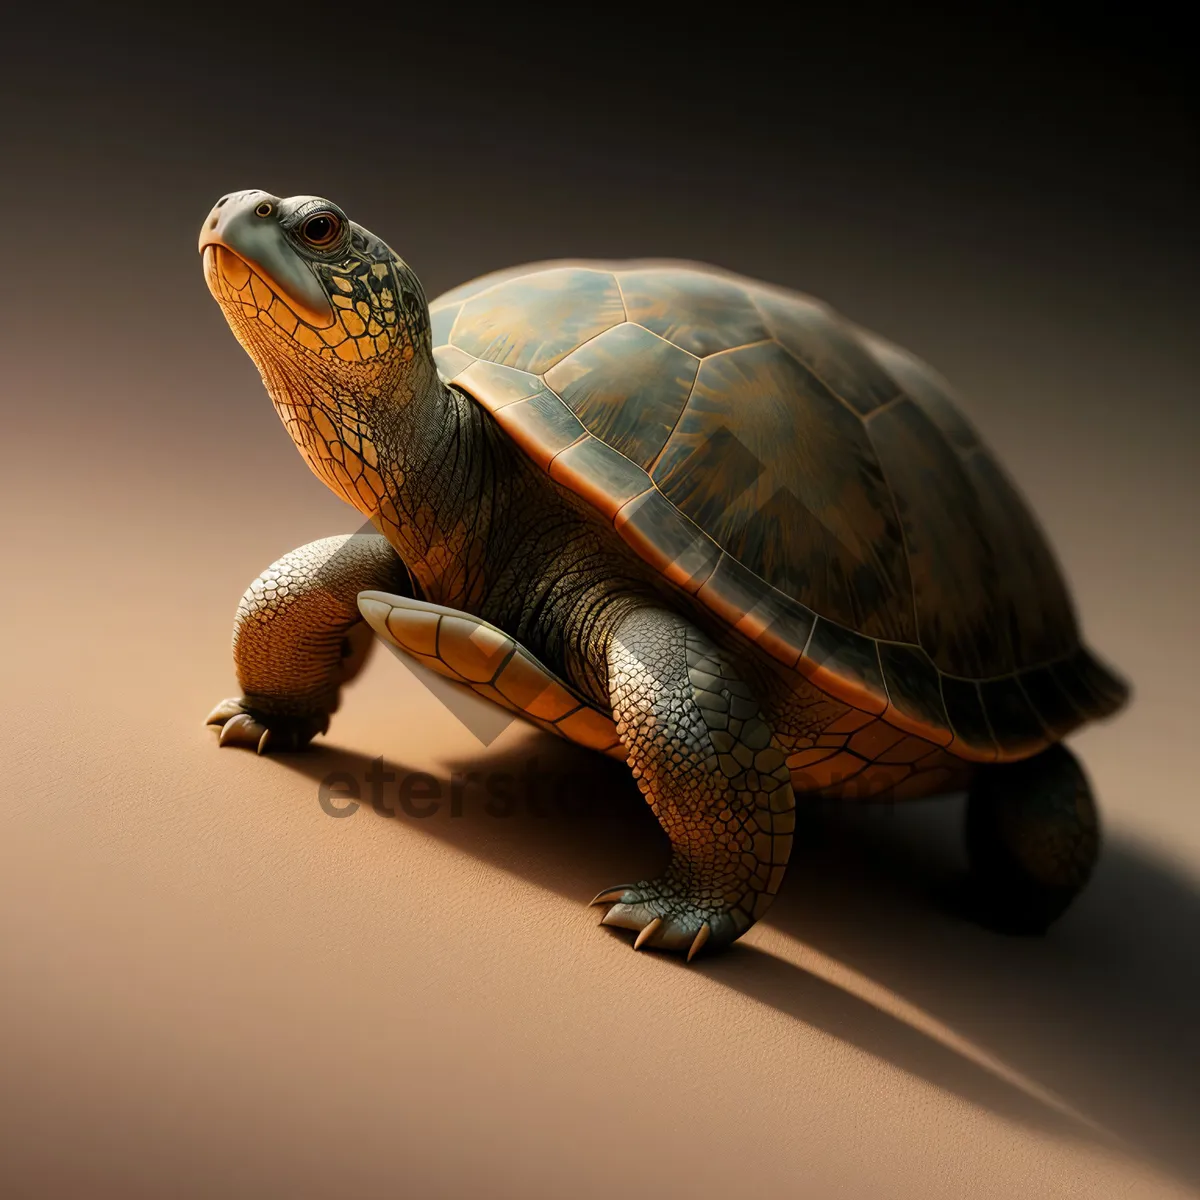 Picture of Slow-moving Terrapin with Cute, Protective Shell